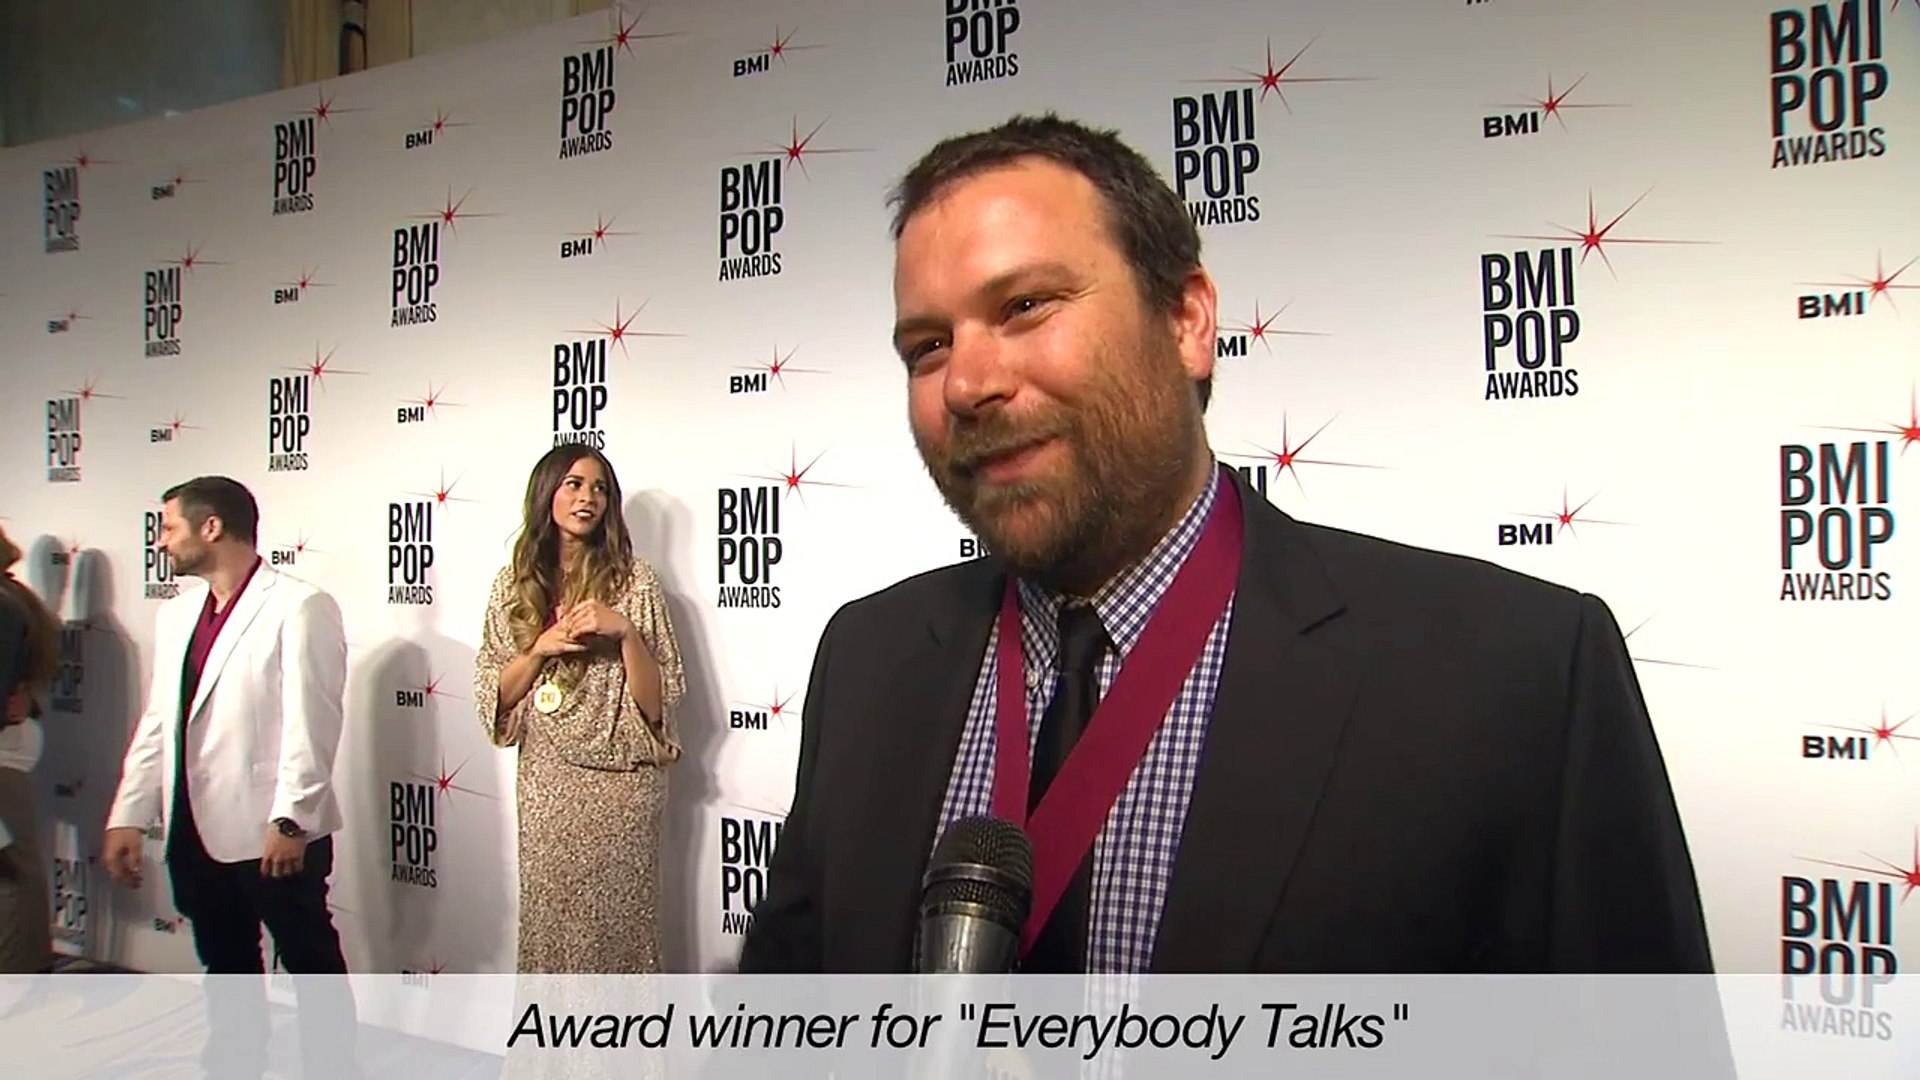 Tim Pagnotta Interviewed At The 2013 Bmi Pop Music Awards Video